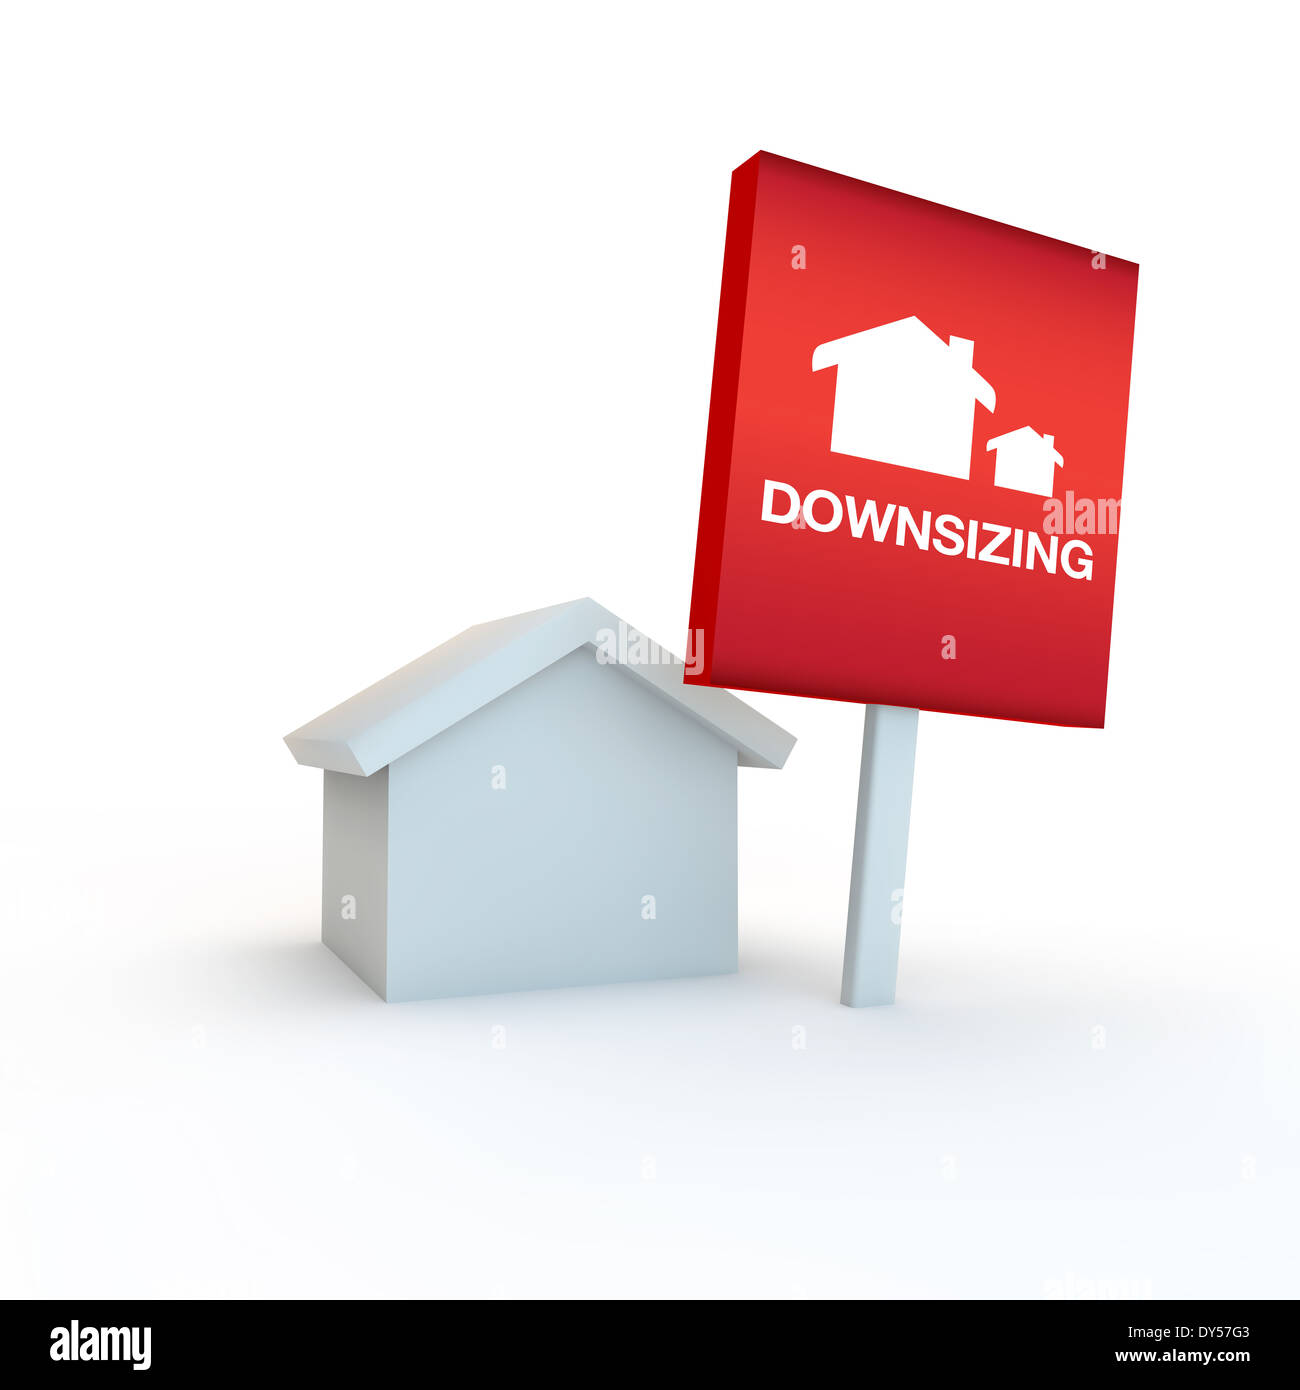 red sign on a white background with house concept of downsizing Stock Photo